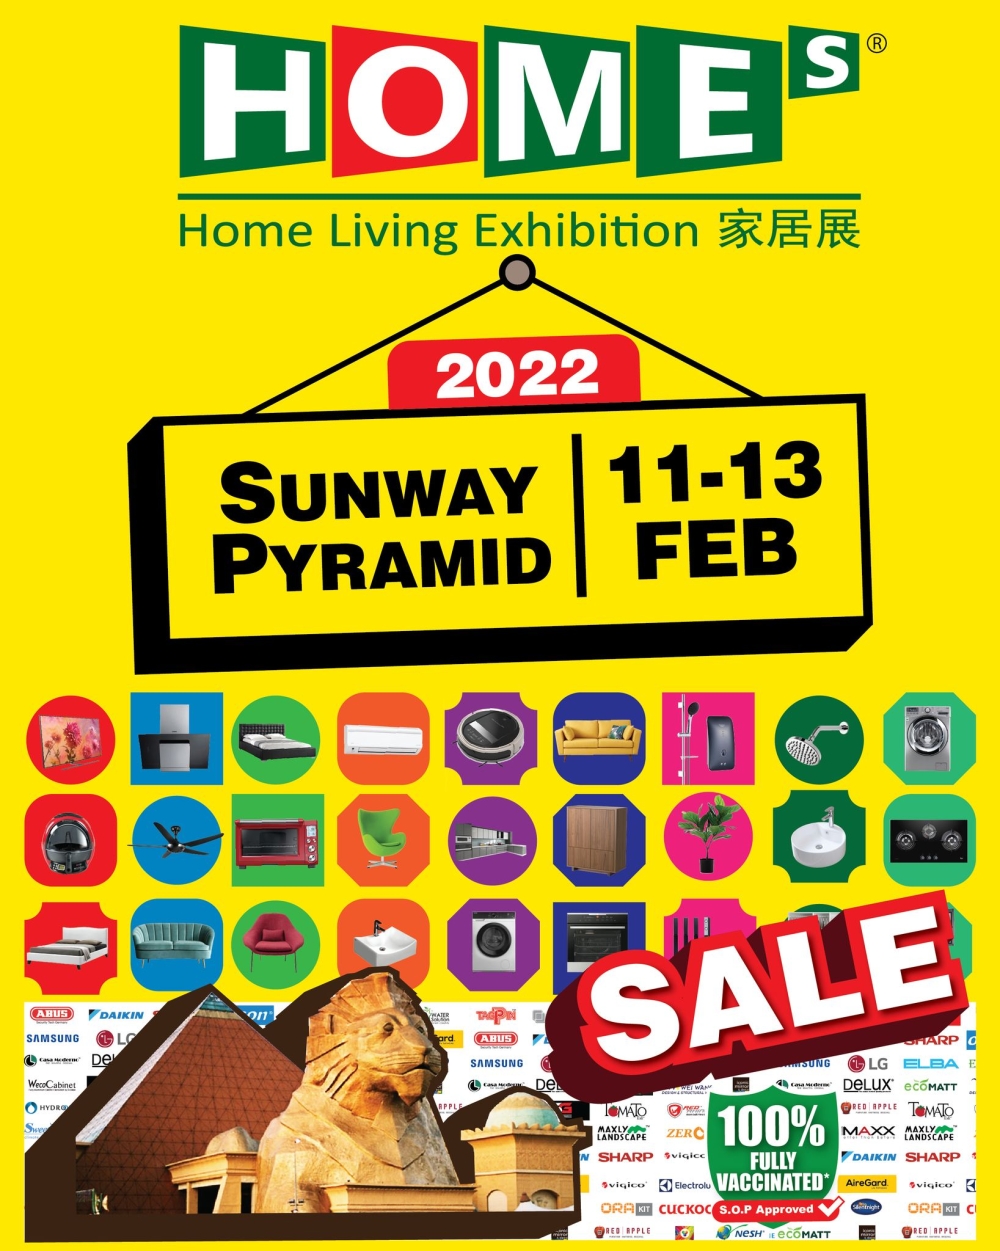 HOMEs - Home Living Exhibition 2022